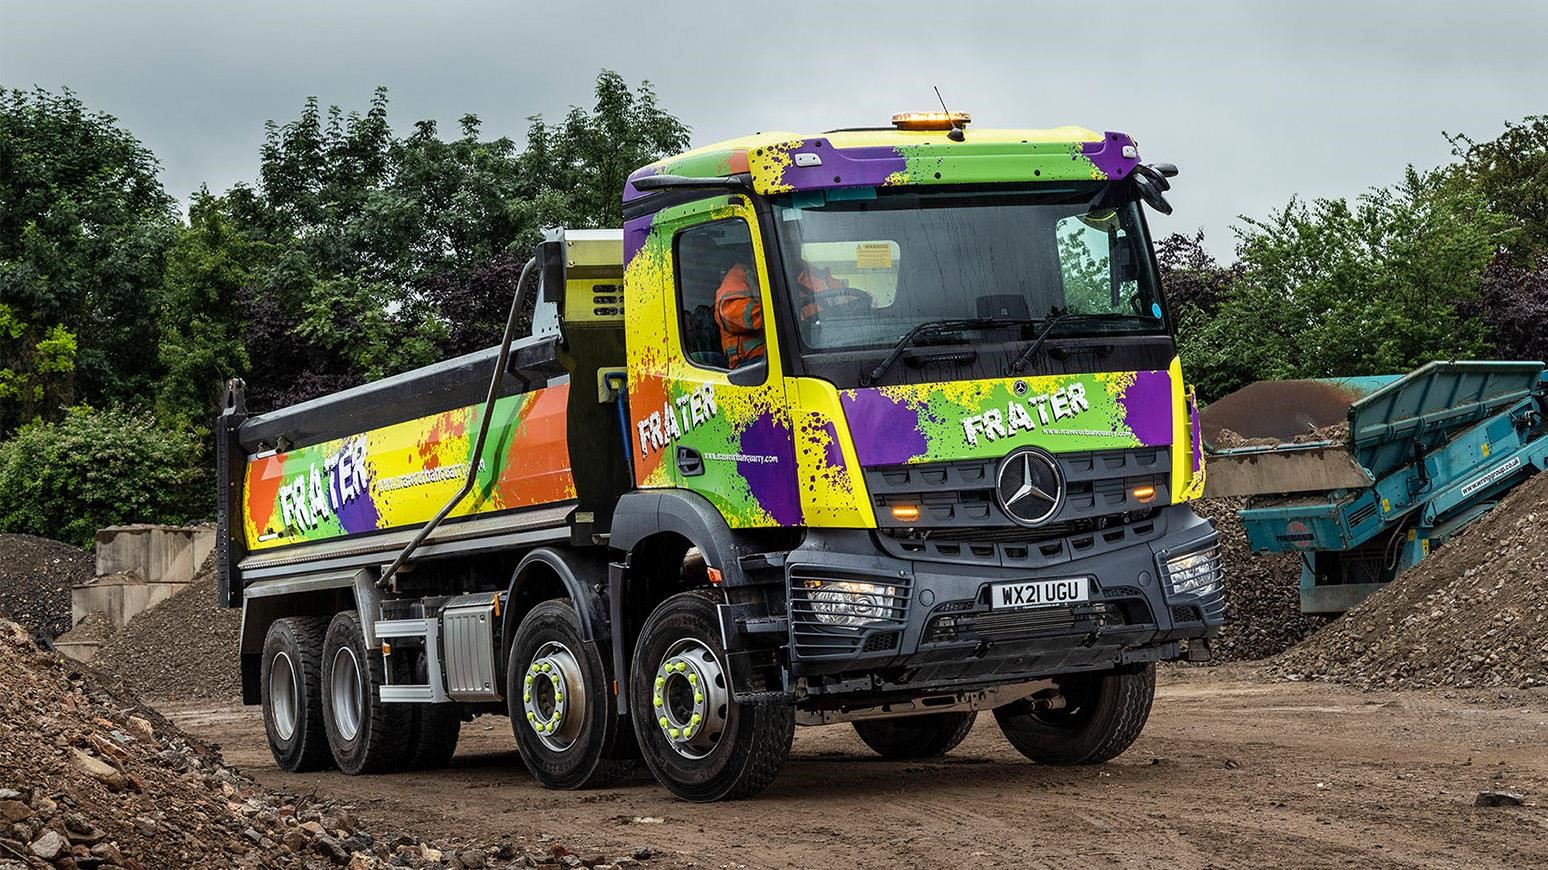 Newly Launched Frater Urban Quarry Of Bristol Acquires 8x4 Mercedes-Benz 3240 Arocs